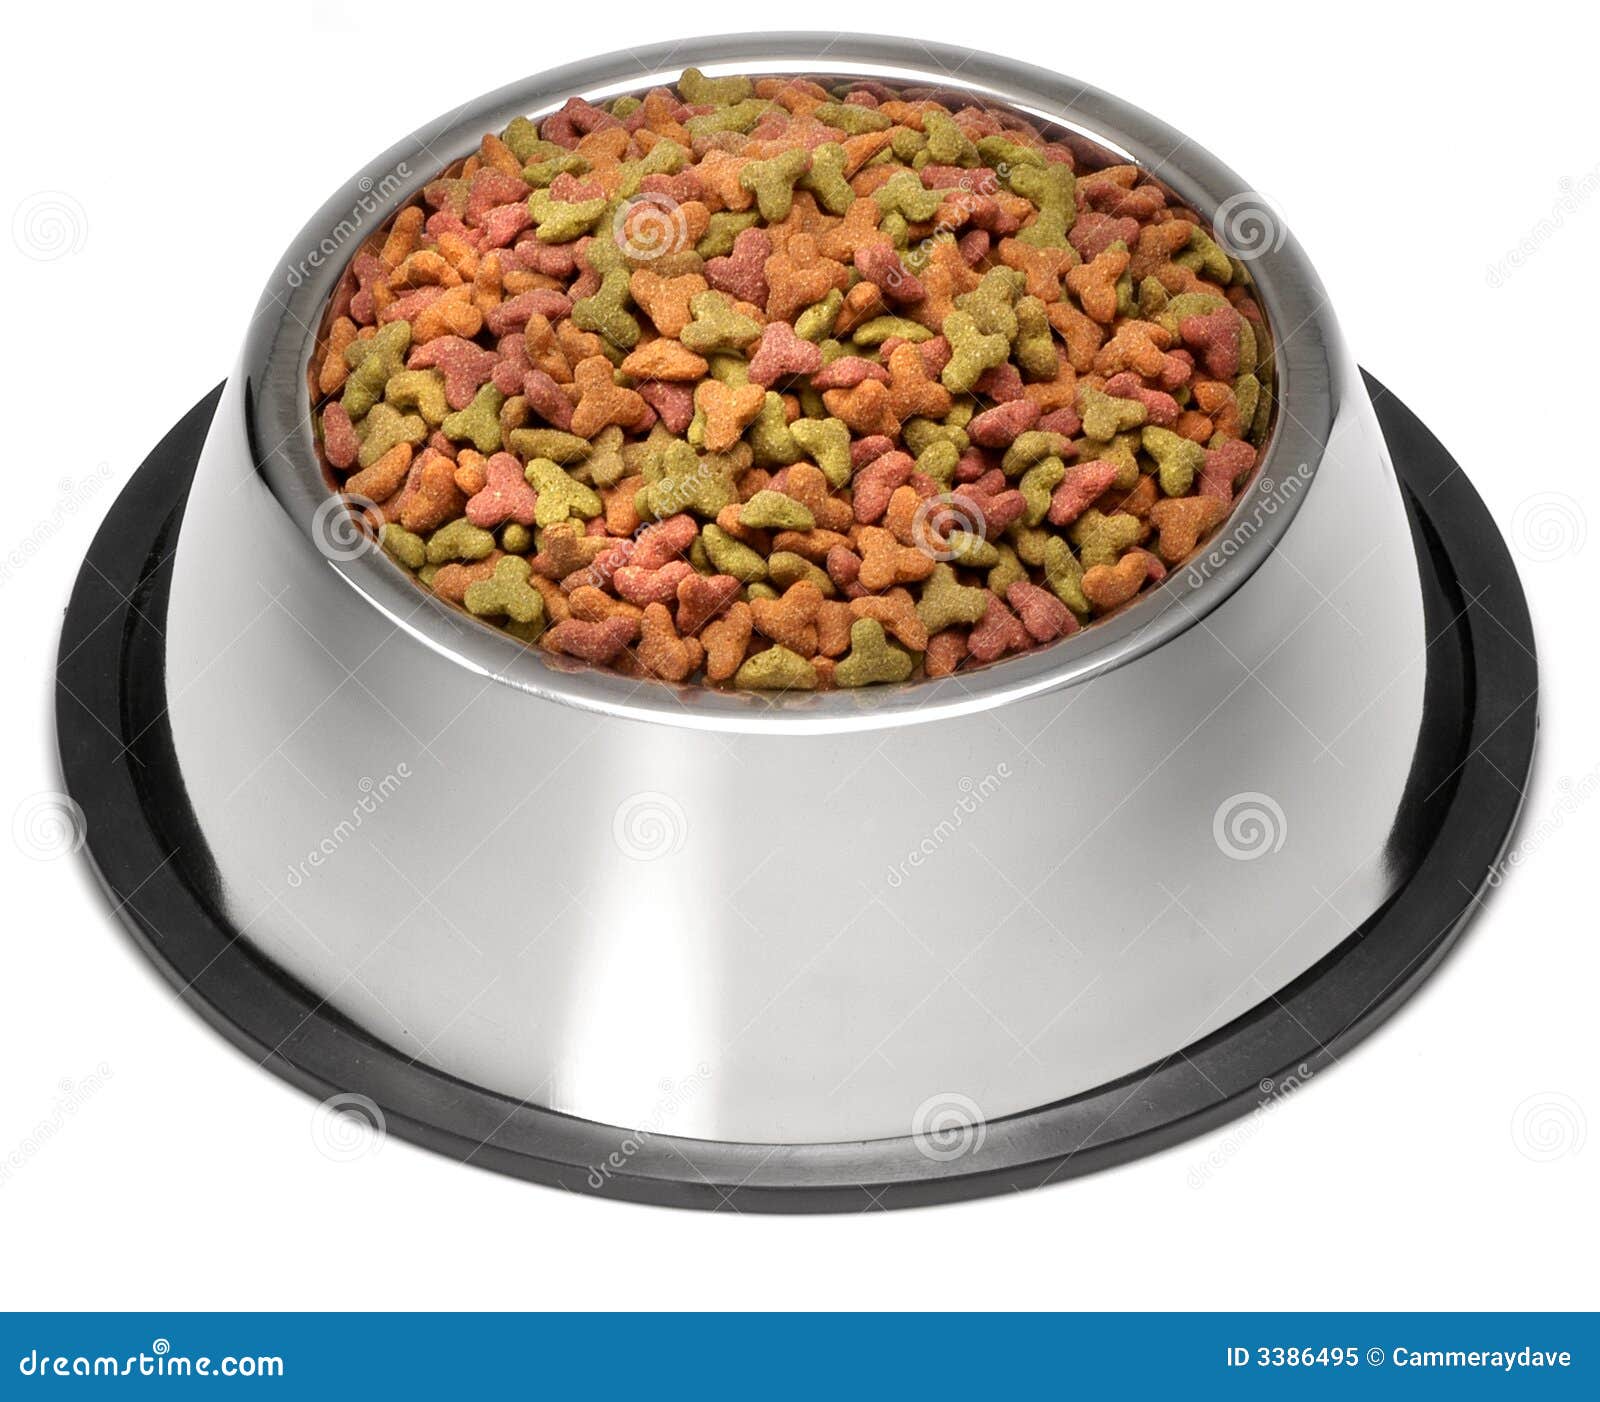 Get best organic dog food for puppies